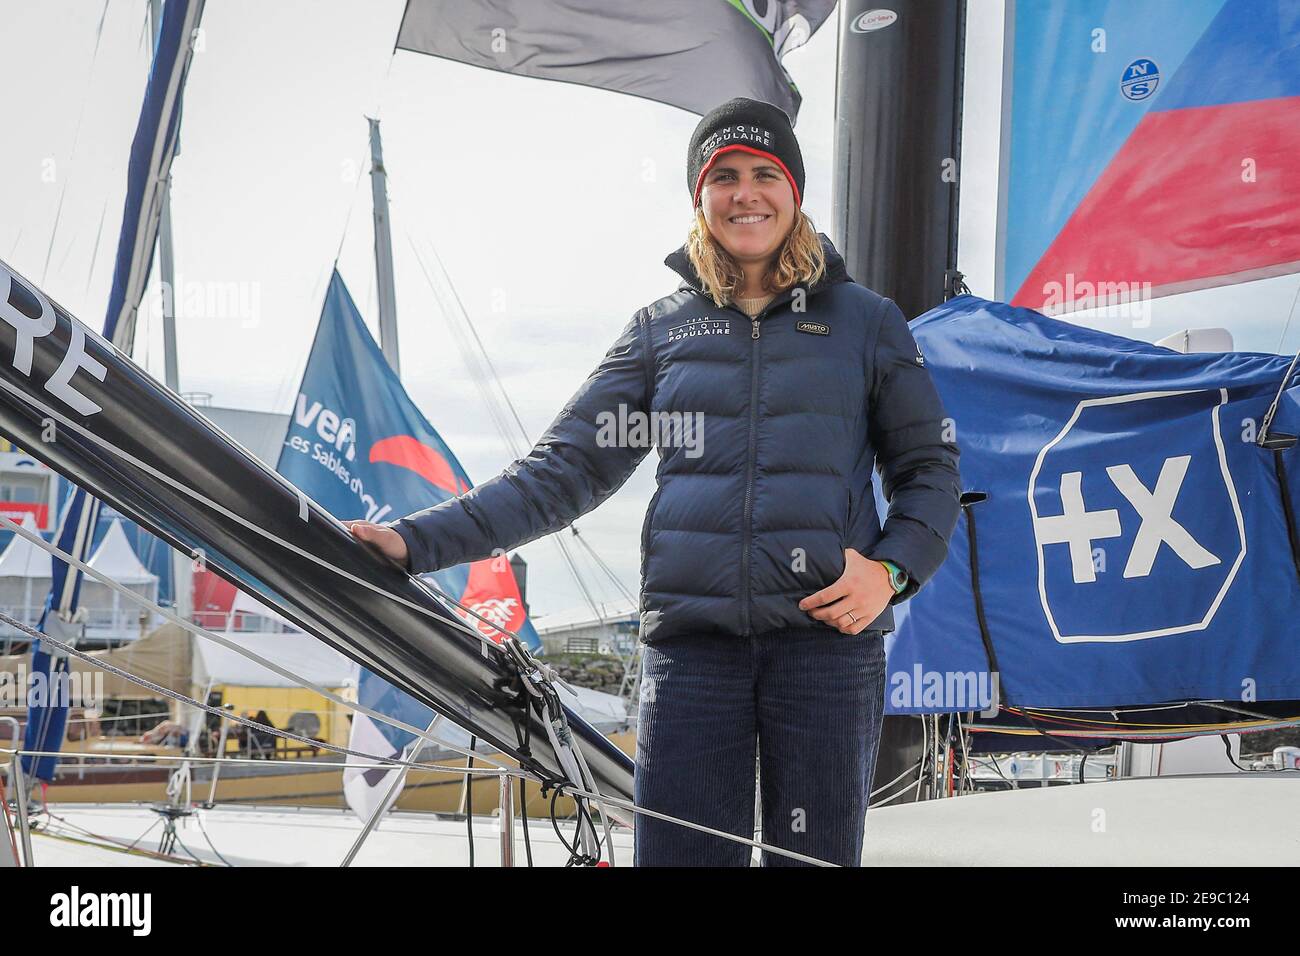 File photo dated October 16, 2020 of Clarisse Cremer poses onboard her  Imoca 60 monohull 'Banque Populaire', in Les Sables-d'Olonne, a few weeks  prior to take the start of the Vendee Globe